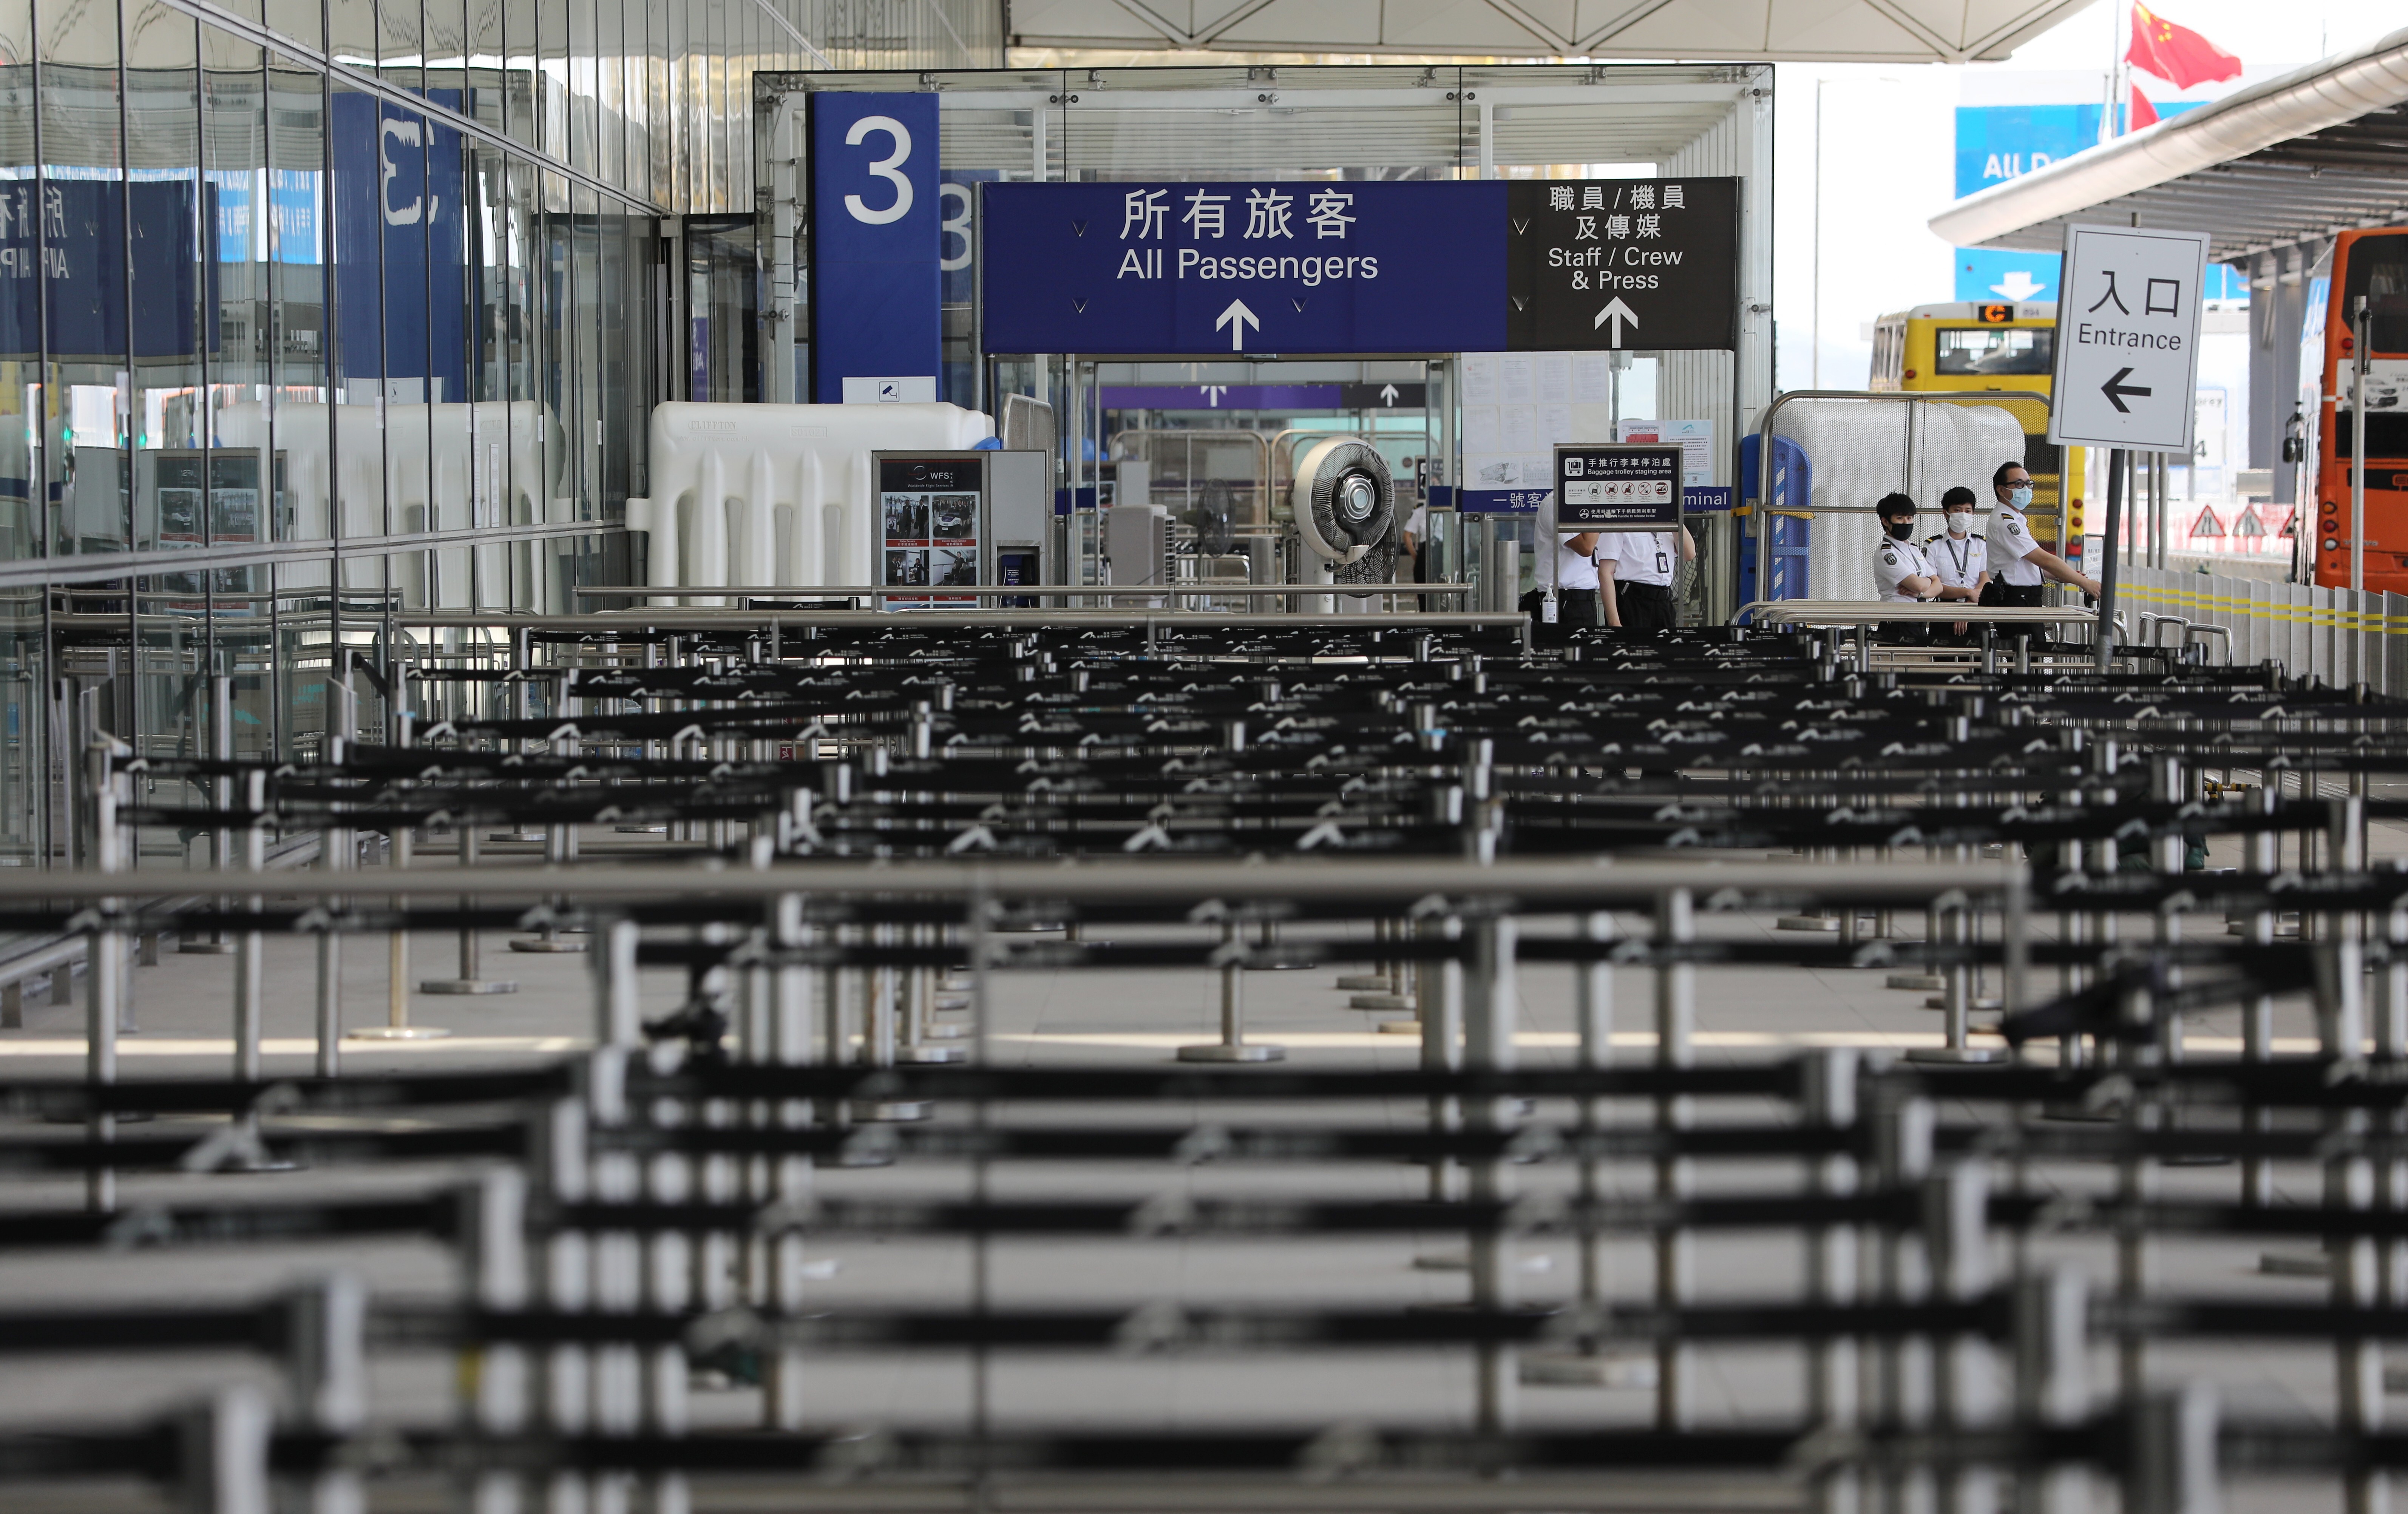 A travel bubble would allow people to move between certain countries or territories without having to complete a strict quarantine. Photo: SCMP / May Tse